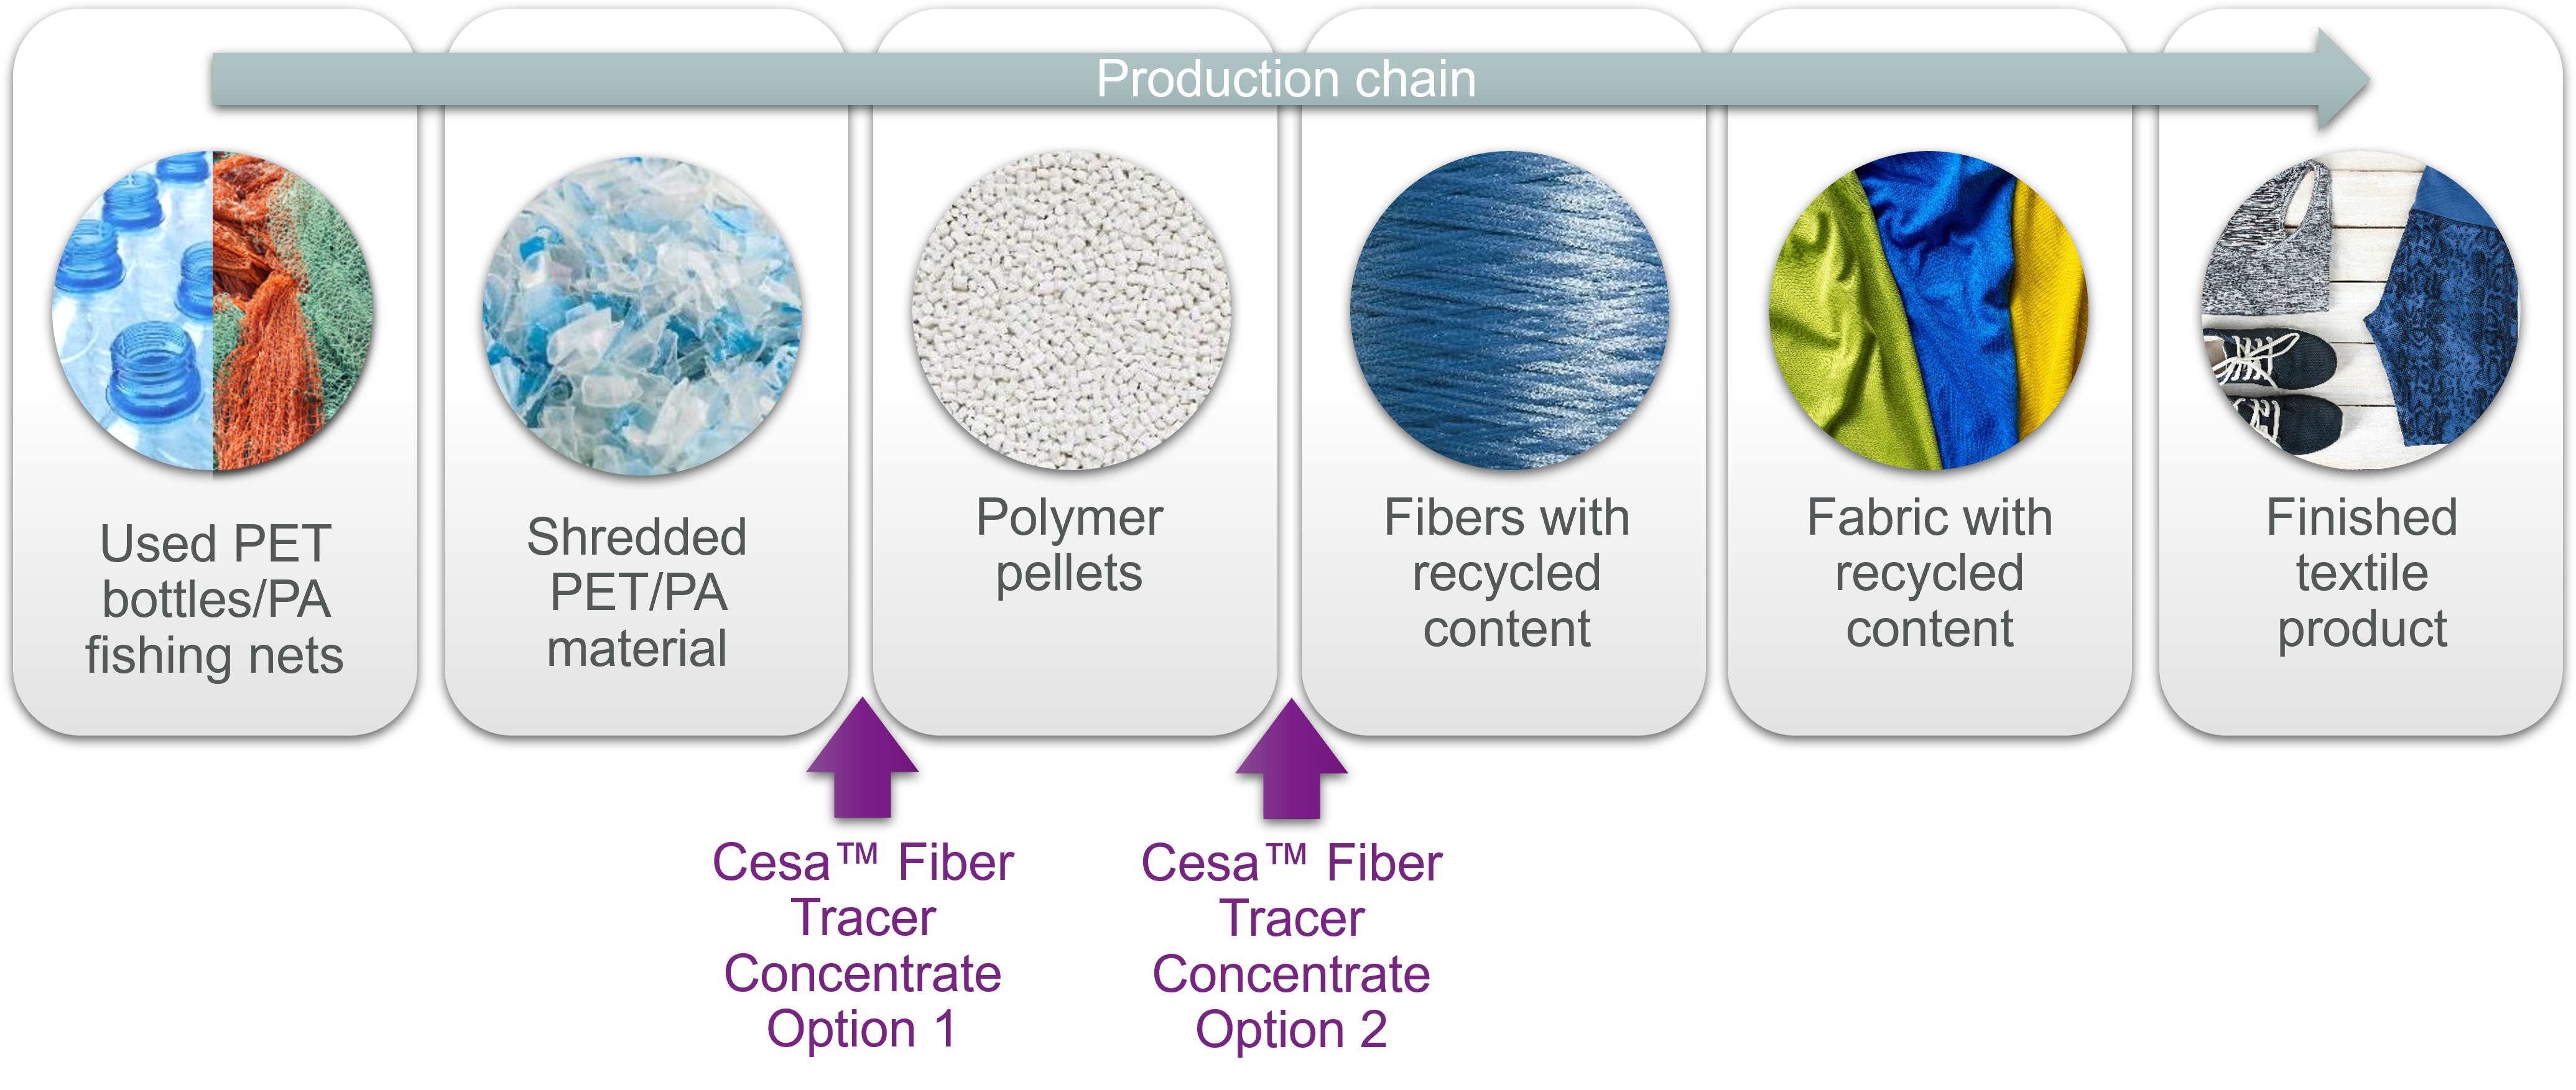 A Practical User Guide on Recycled Fibers for Technical Textile